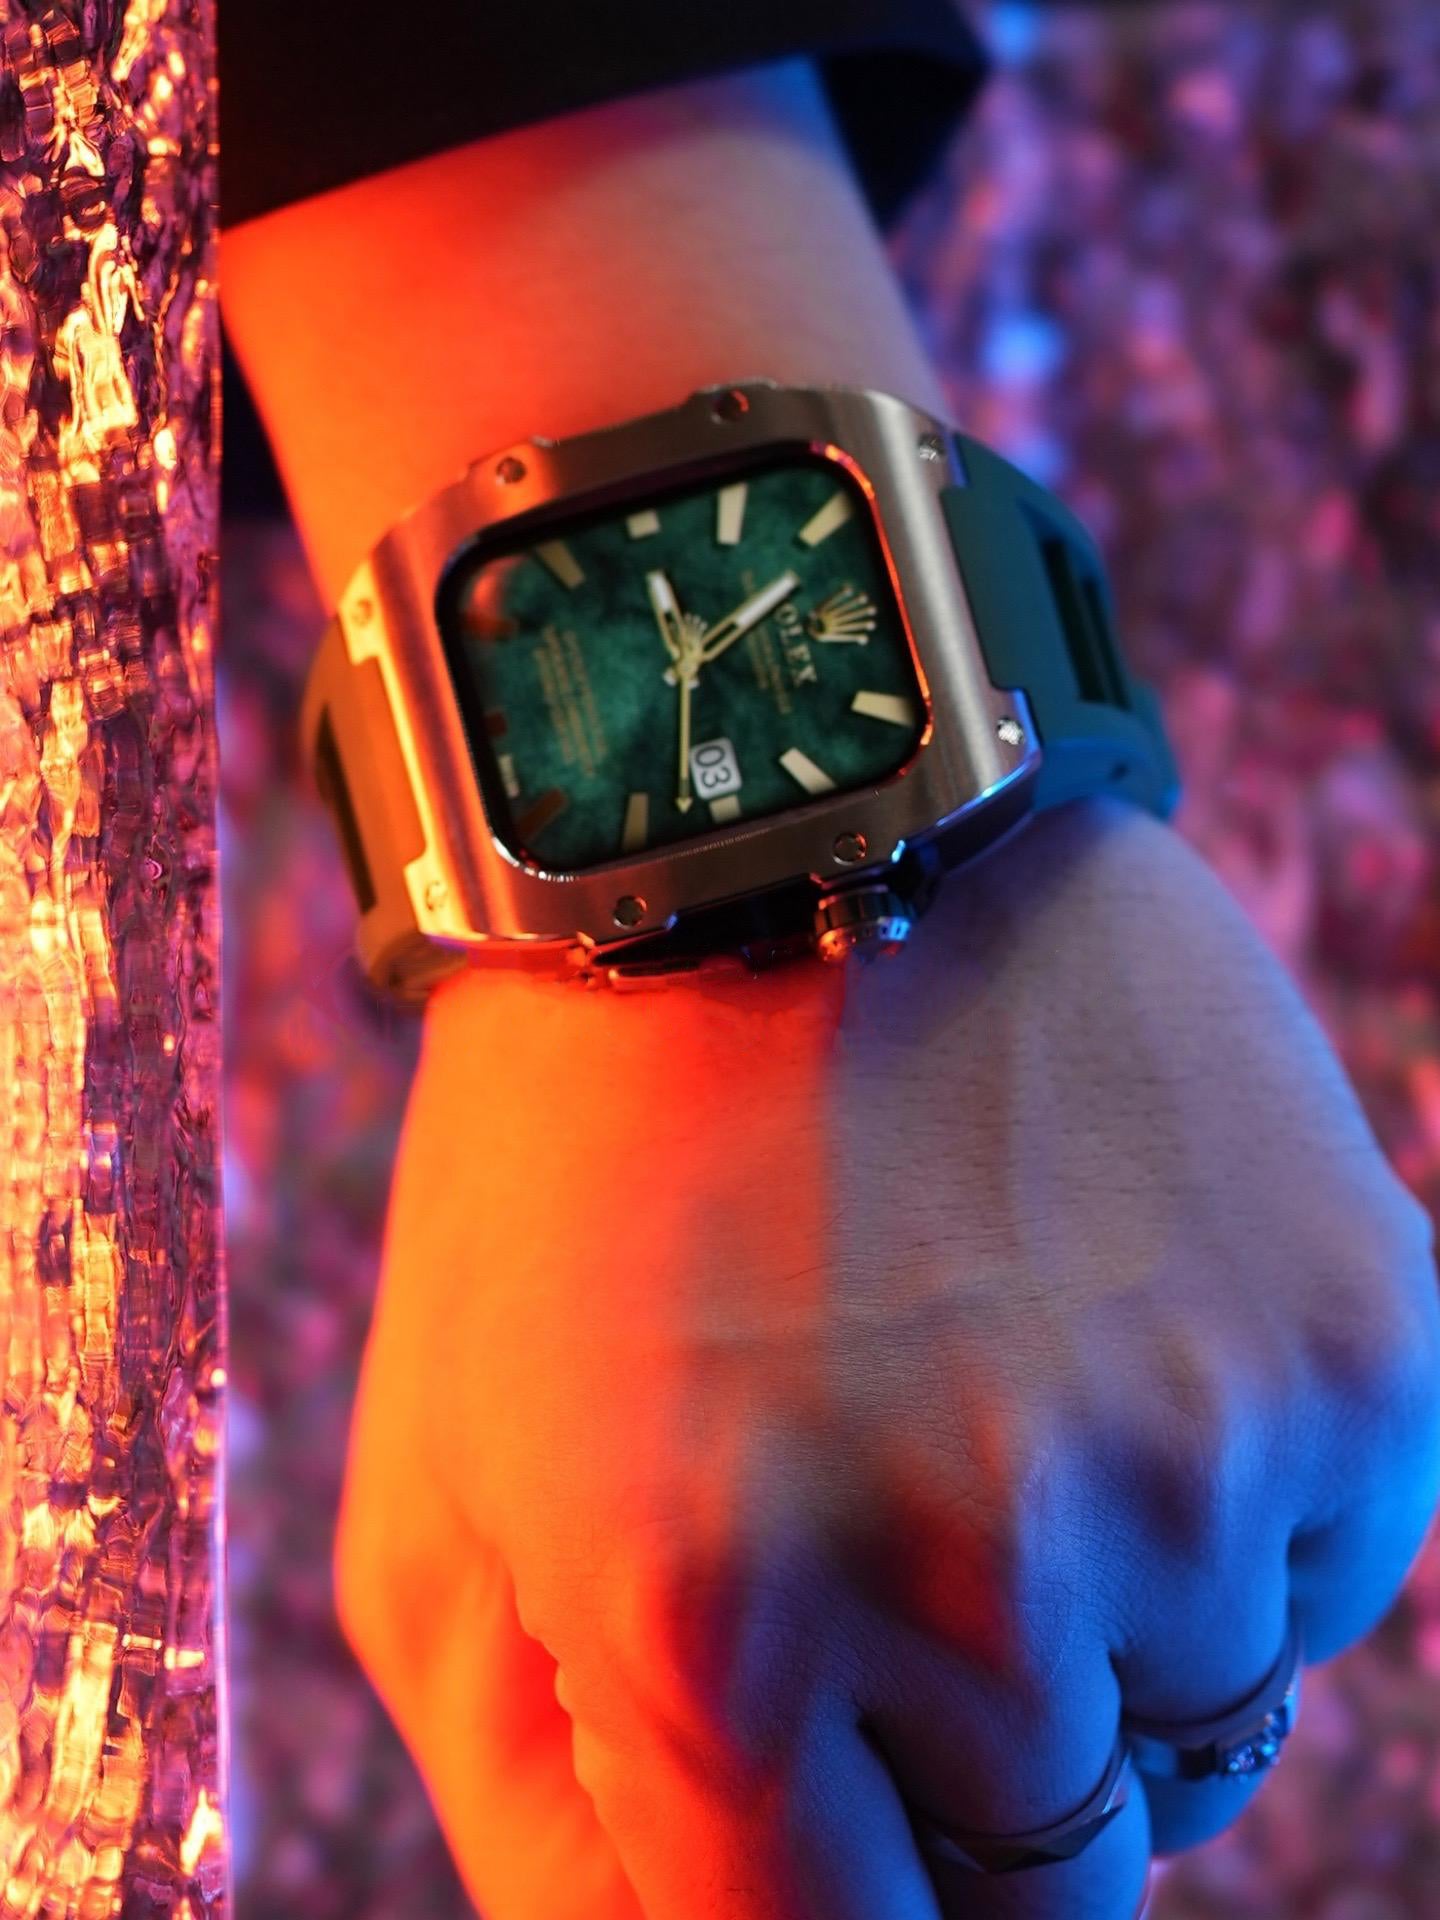 Kewusuma Titan Series - Silver Titan Titanium Apple Watch Case with a forest green watch strap worn by a man putting his hand beside a crystal light